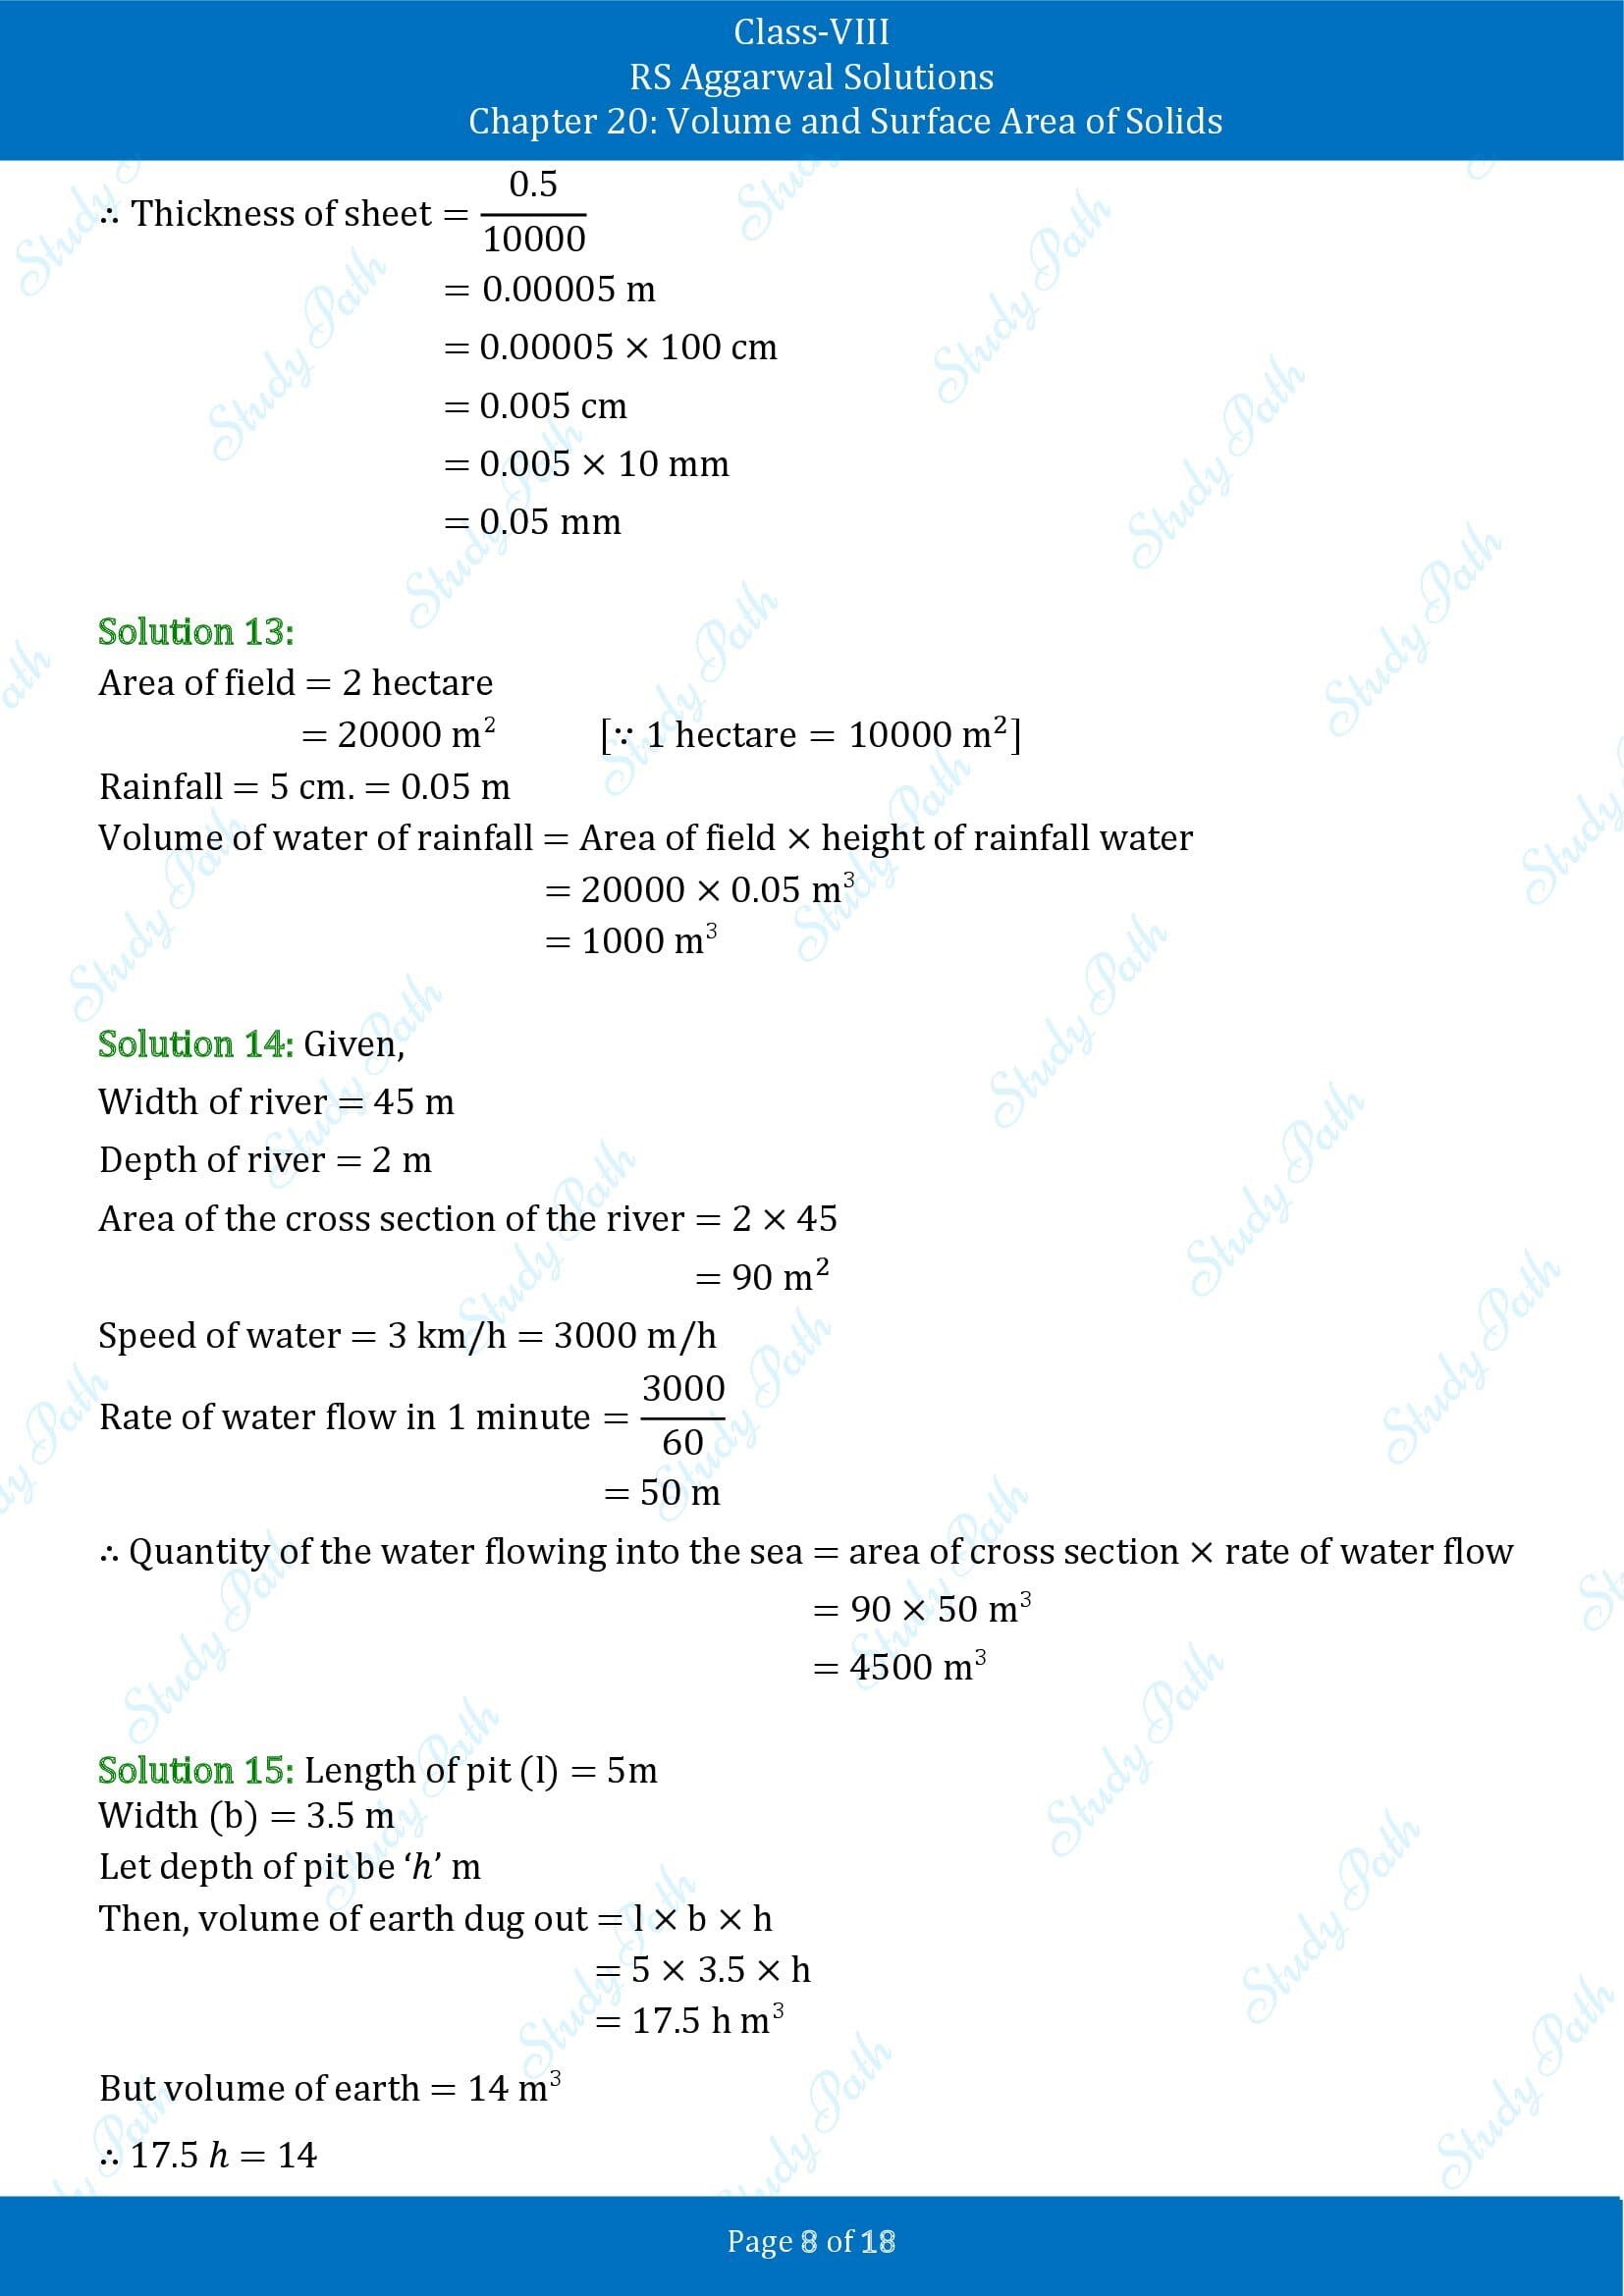 RS Aggarwal Solutions Class 8 Chapter 20 Volume and Surface Area of Solids Exercise 20A 00008